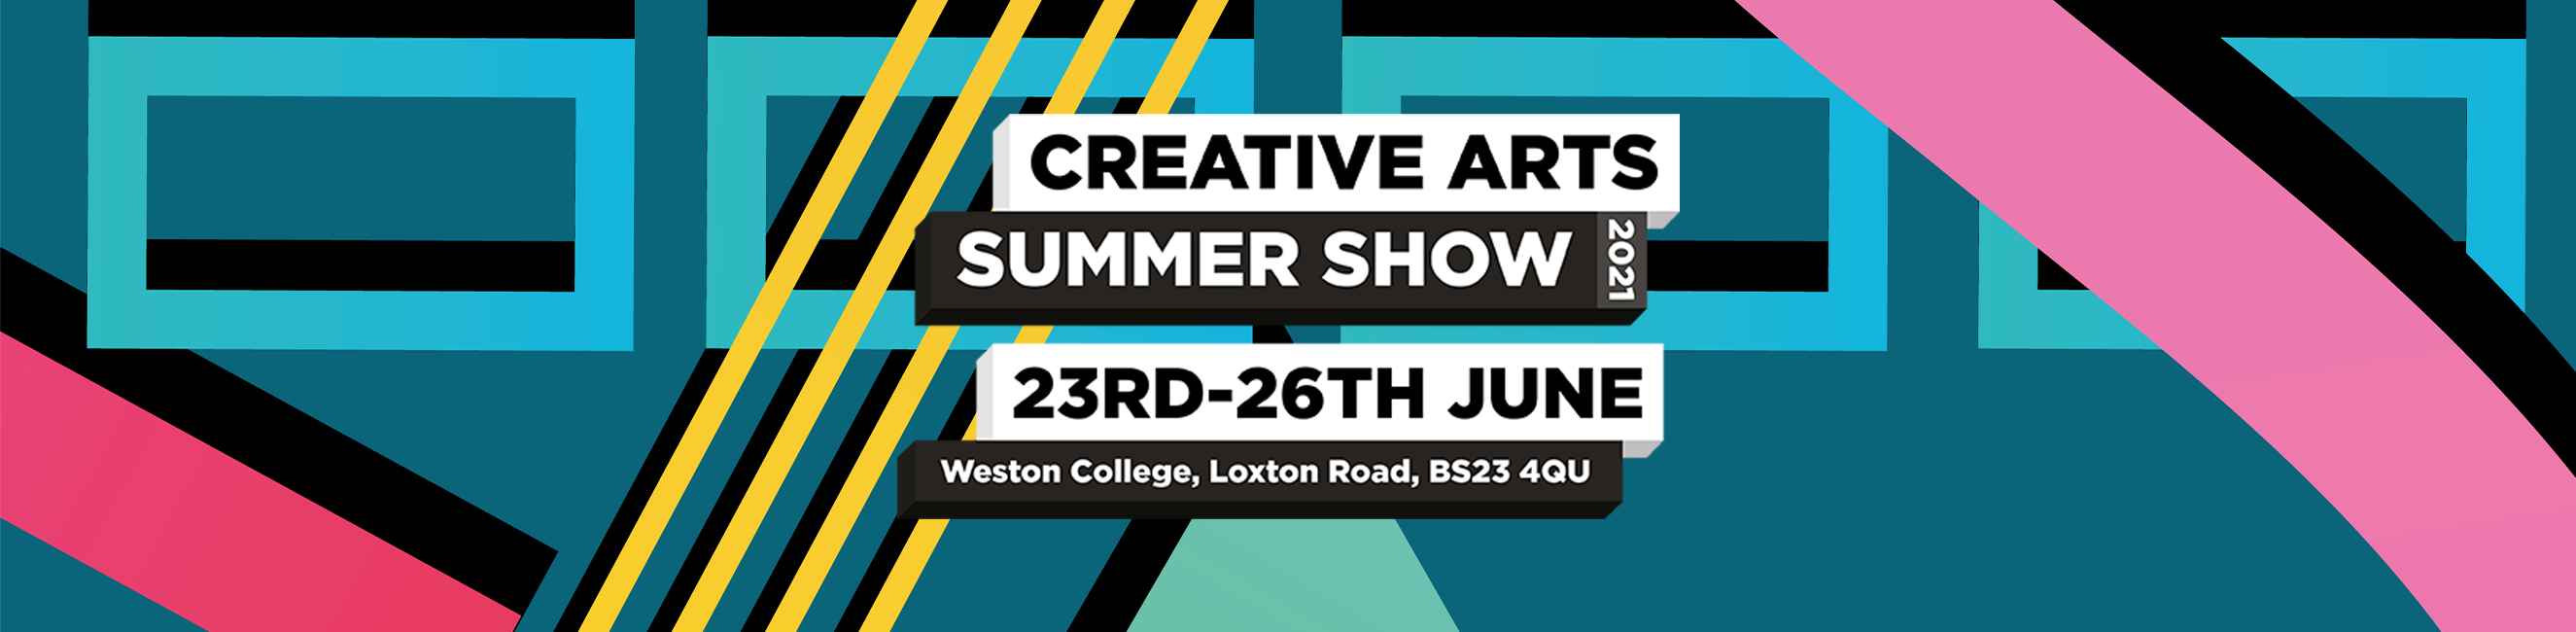 Creative Arts summer SHow music gig and art exhibition festival in weston-super-mare 